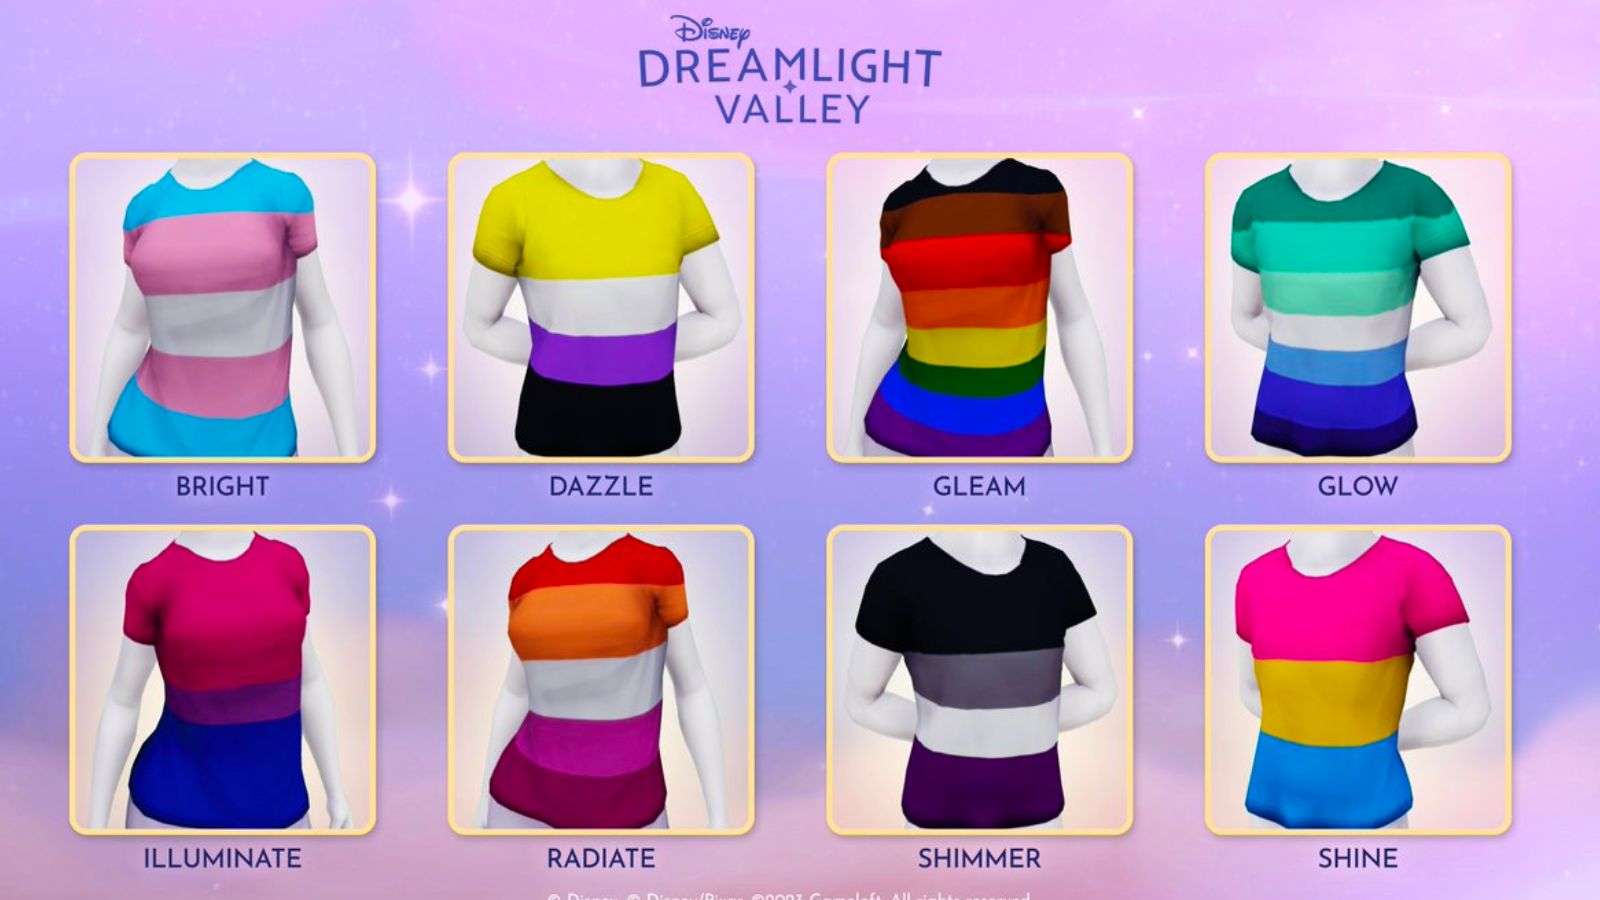 How to claim Disney Dreamlight Valley pride t-shirts